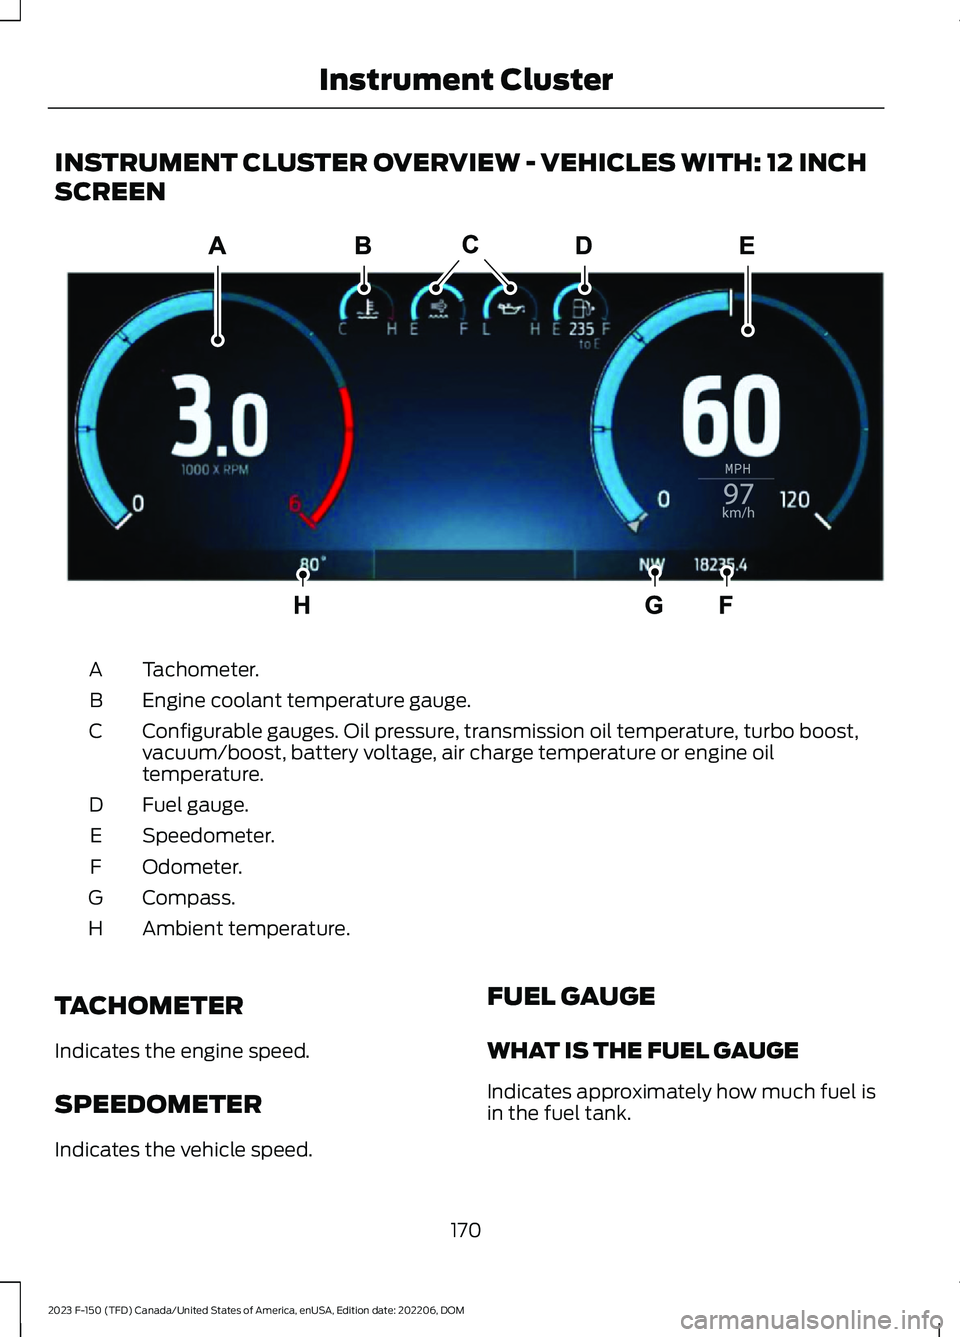 FORD F150 2023  Owners Manual INSTRUMENT CLUSTER OVERVIEW - VEHICLES WITH: 12 INCH
SCREEN
Tachometer.A
Engine coolant temperature gauge.B
Configurable gauges. Oil pressure, transmission oil temperature, turbo boost,vacuum/boost, b